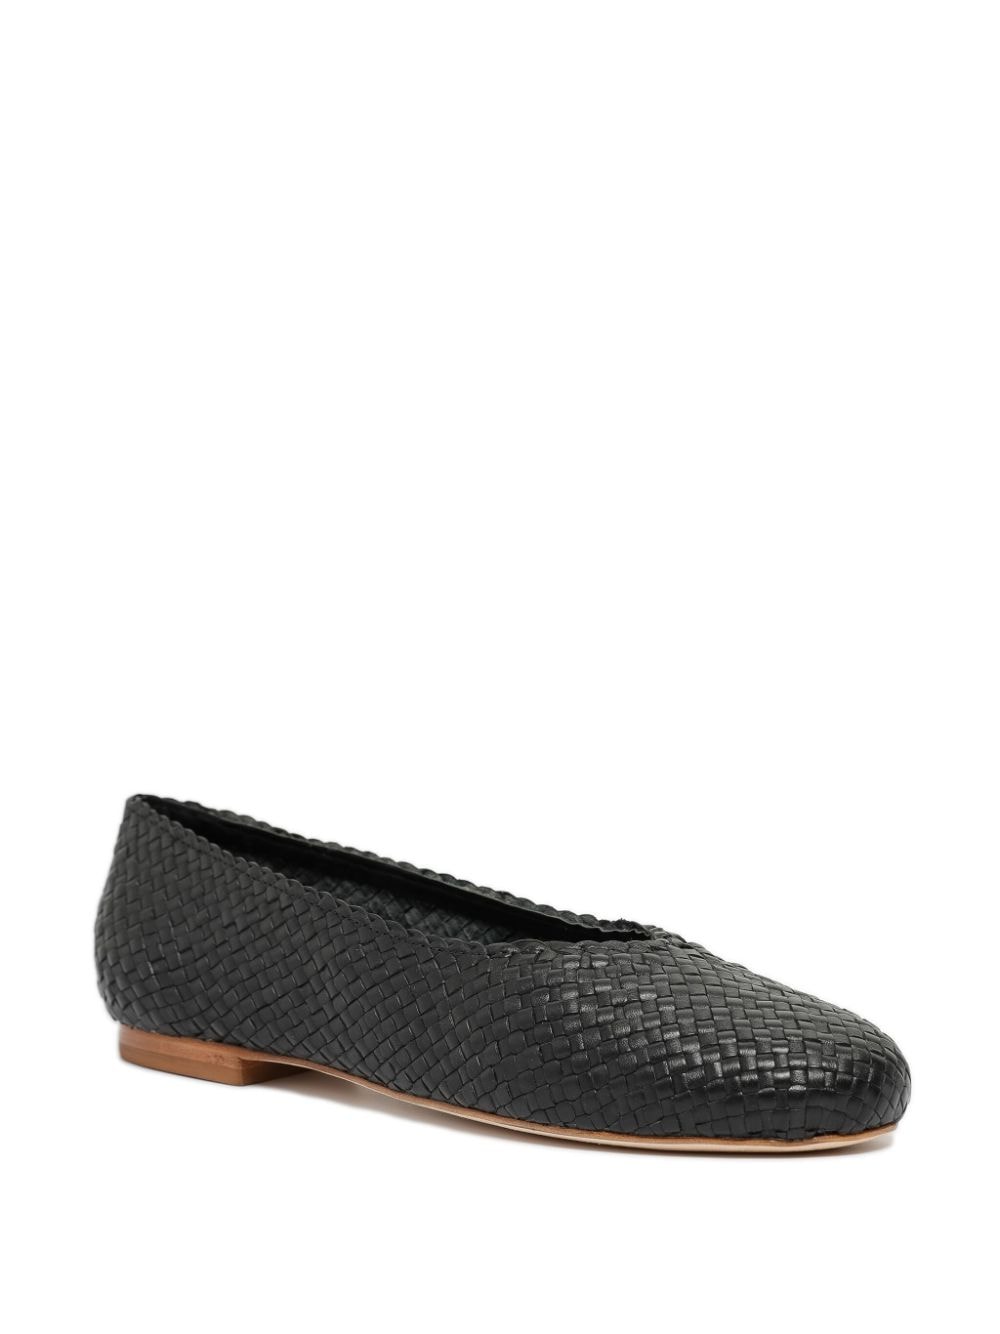 Shop Sarah Chofakian William Leather Ballerina Shoes In Black